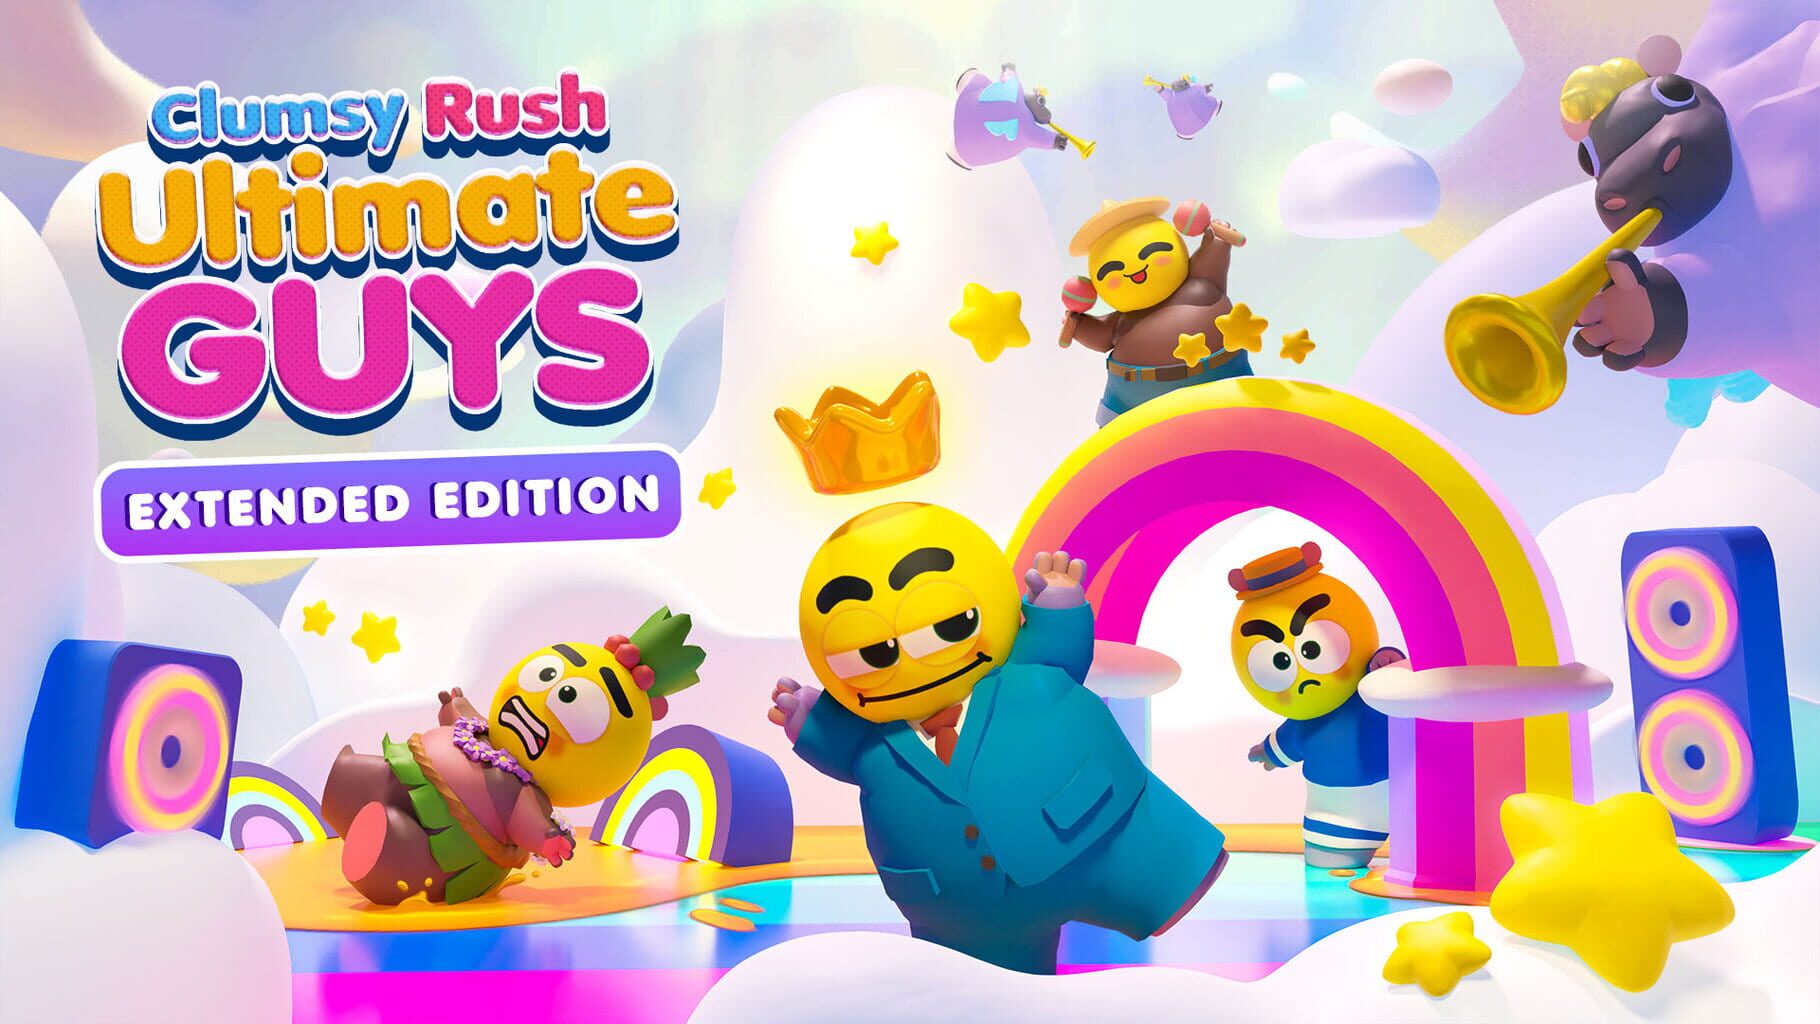 Clumsy Rush: Ultimate Guys - Extended Edition artwork